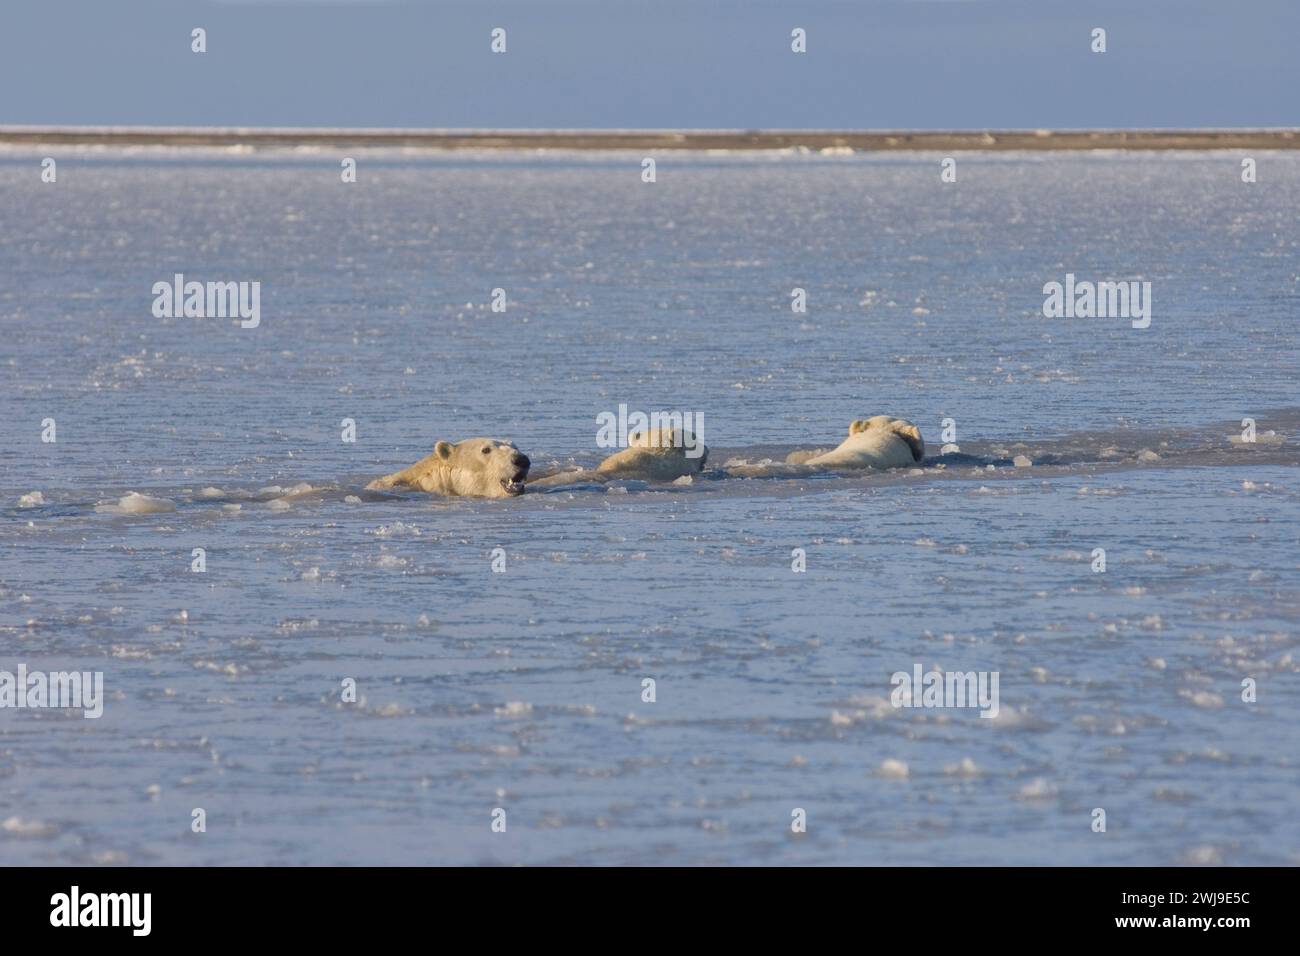 Polar bears, Ursus maritimus, sow cubs swimming in water in newly forming pack ice Beaufort Sea Arctic Ocean 1002 area of the anwr, Alaska Stock Photo